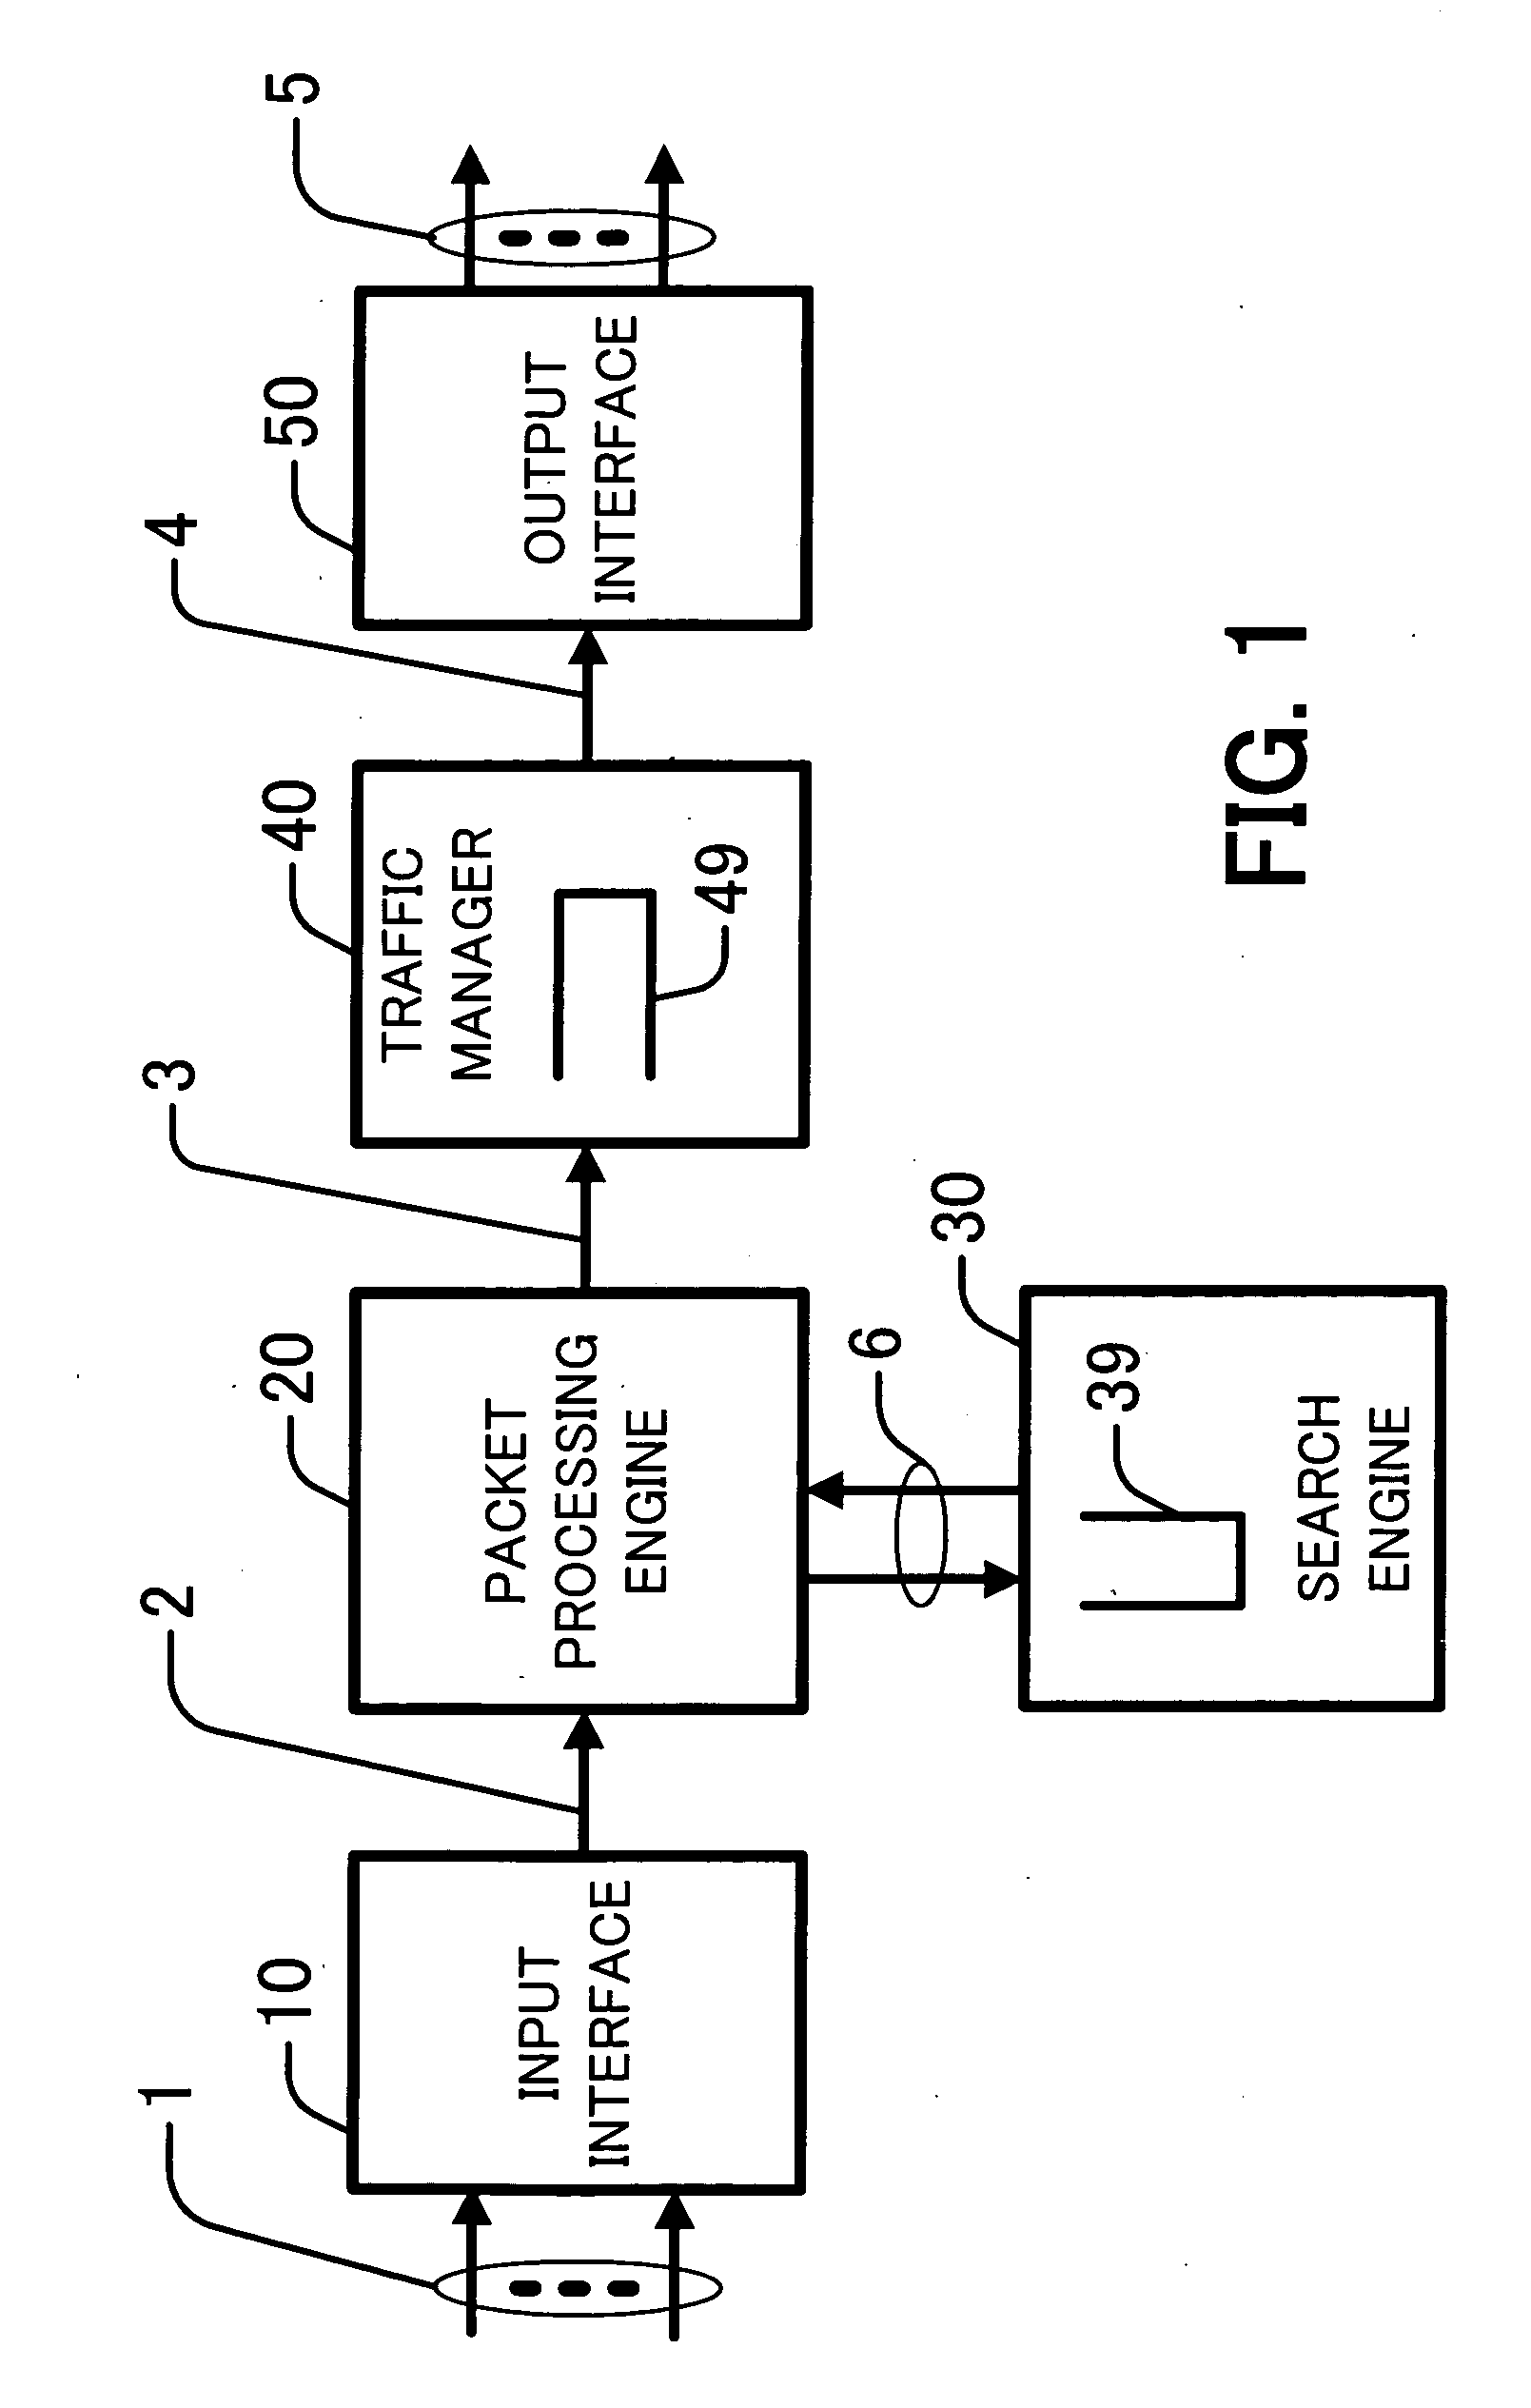 Packet processing apparatus and method